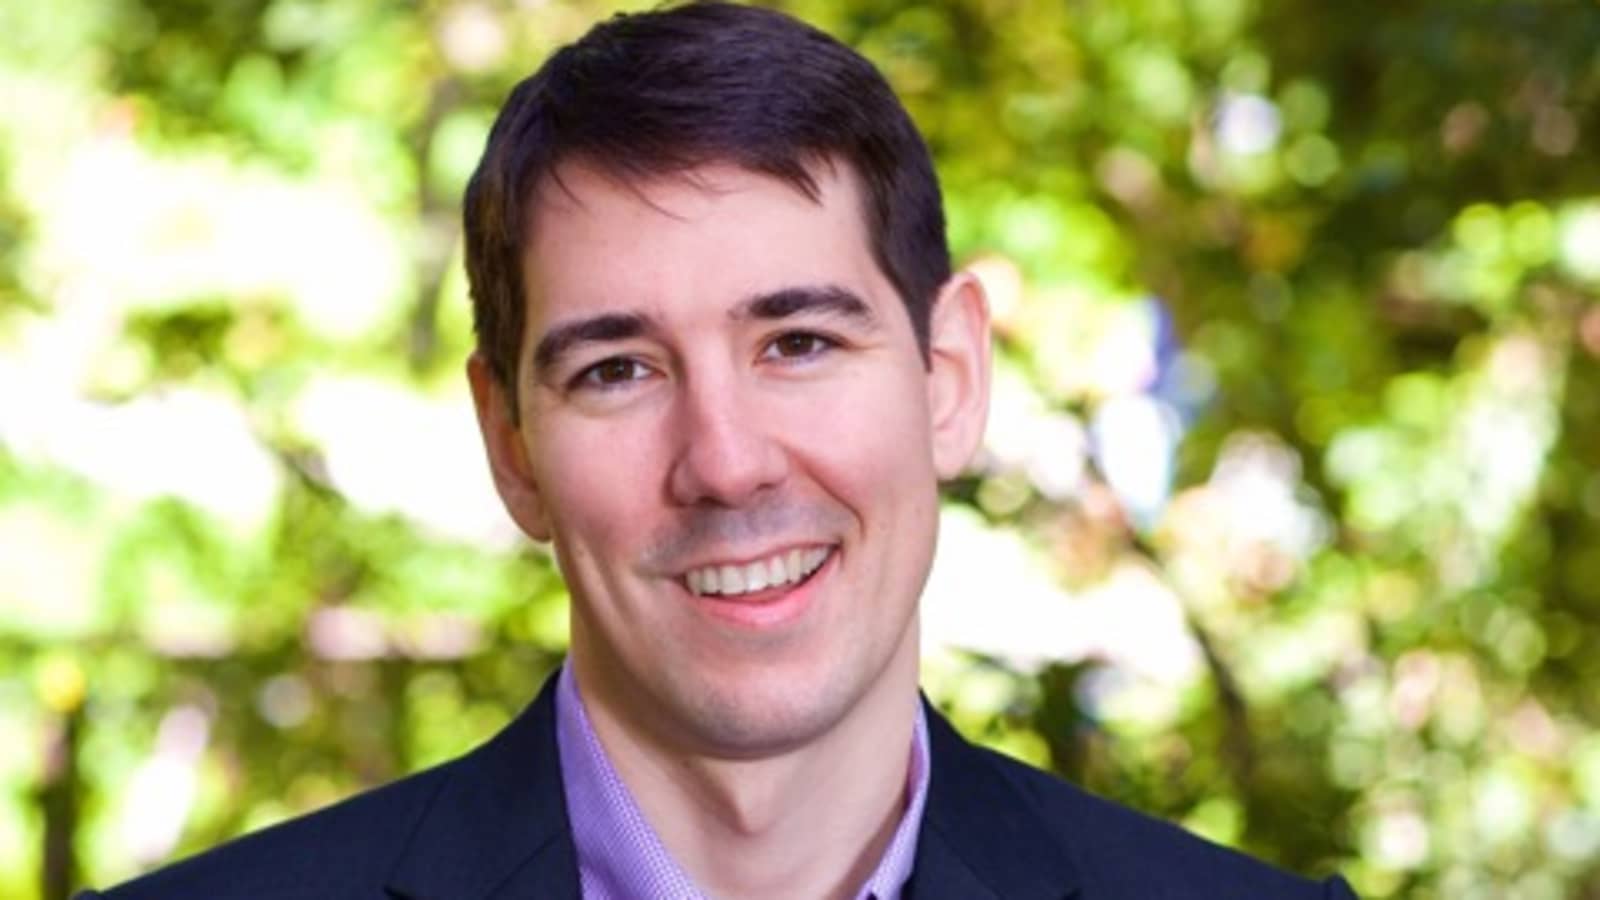 VC Josh Harder is running for Congress in California's 10th district